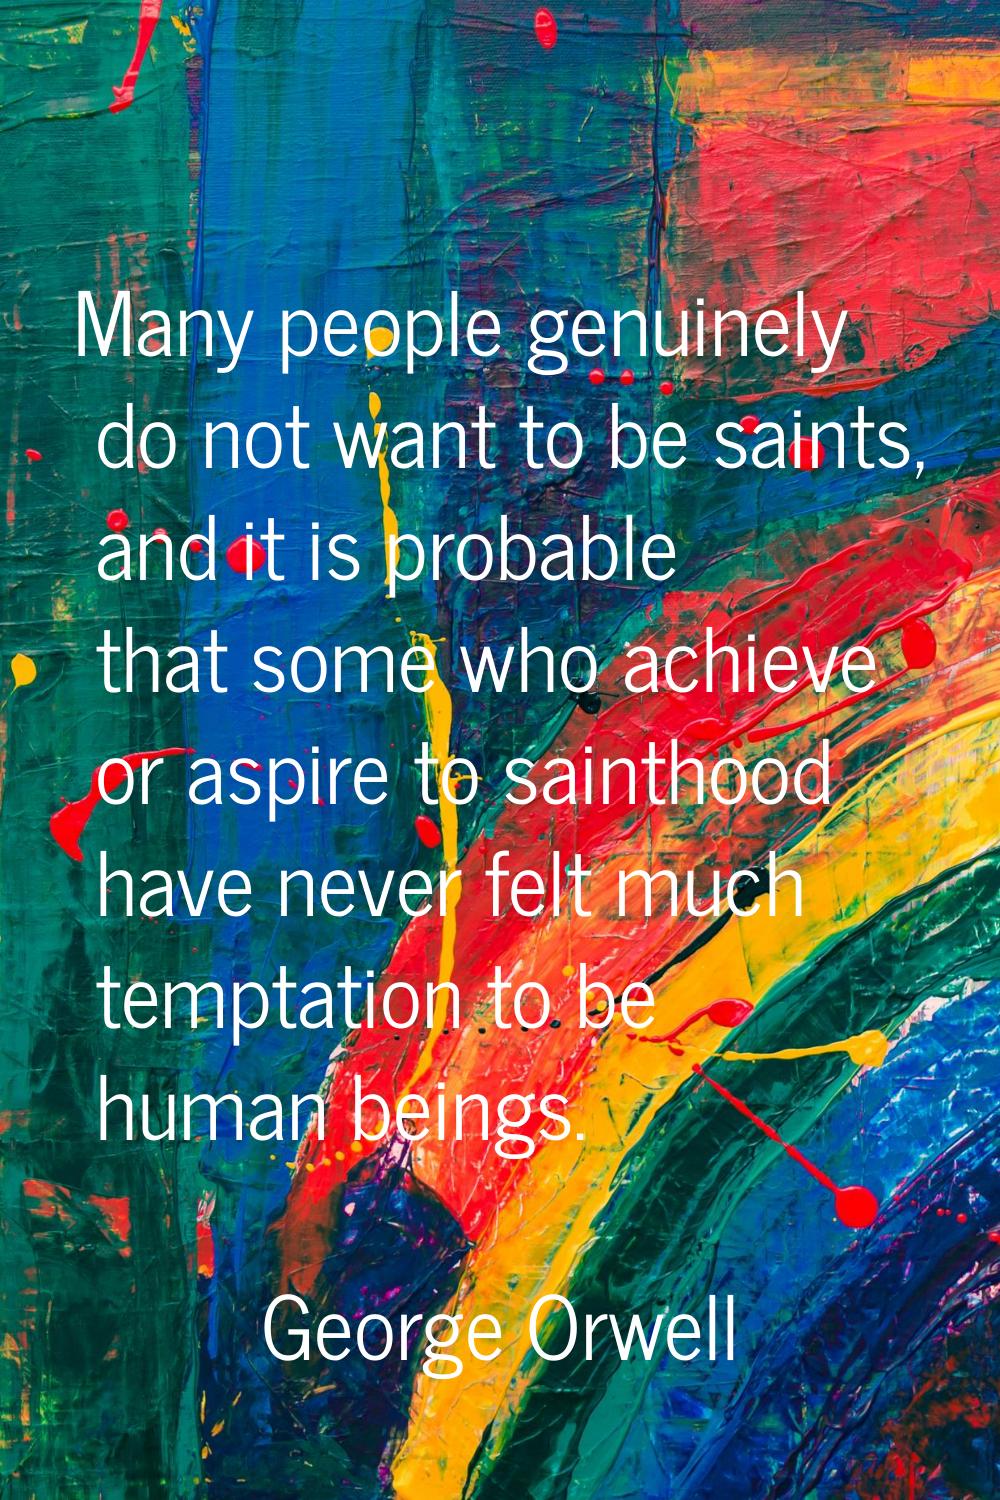 Many people genuinely do not want to be saints, and it is probable that some who achieve or aspire 